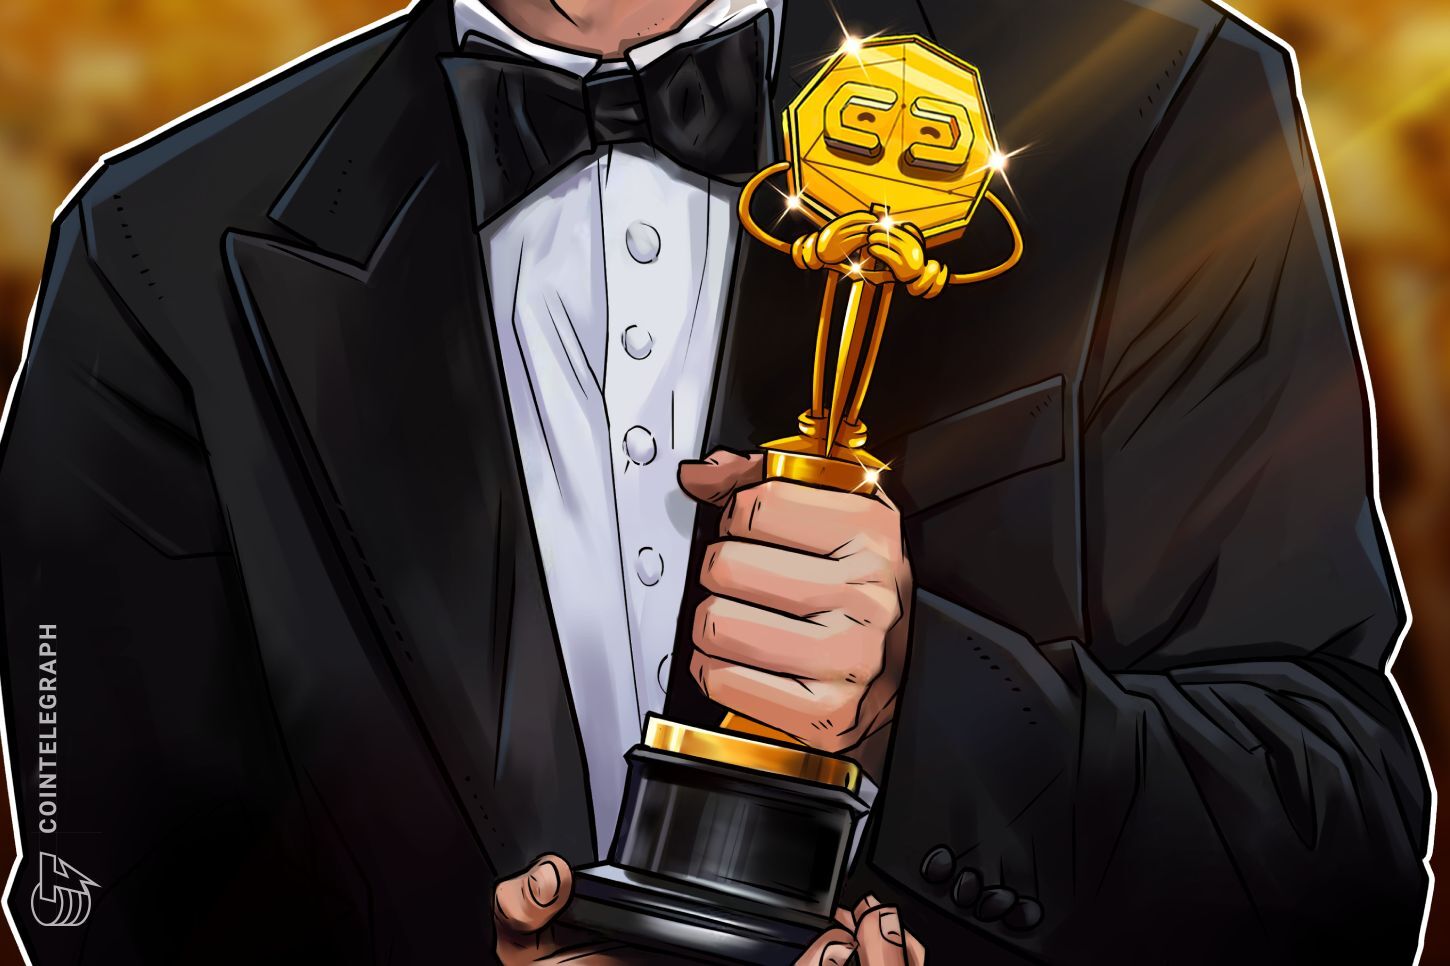 Uniswap Labs’ Crypto: The Game set for Emmy Award consideration